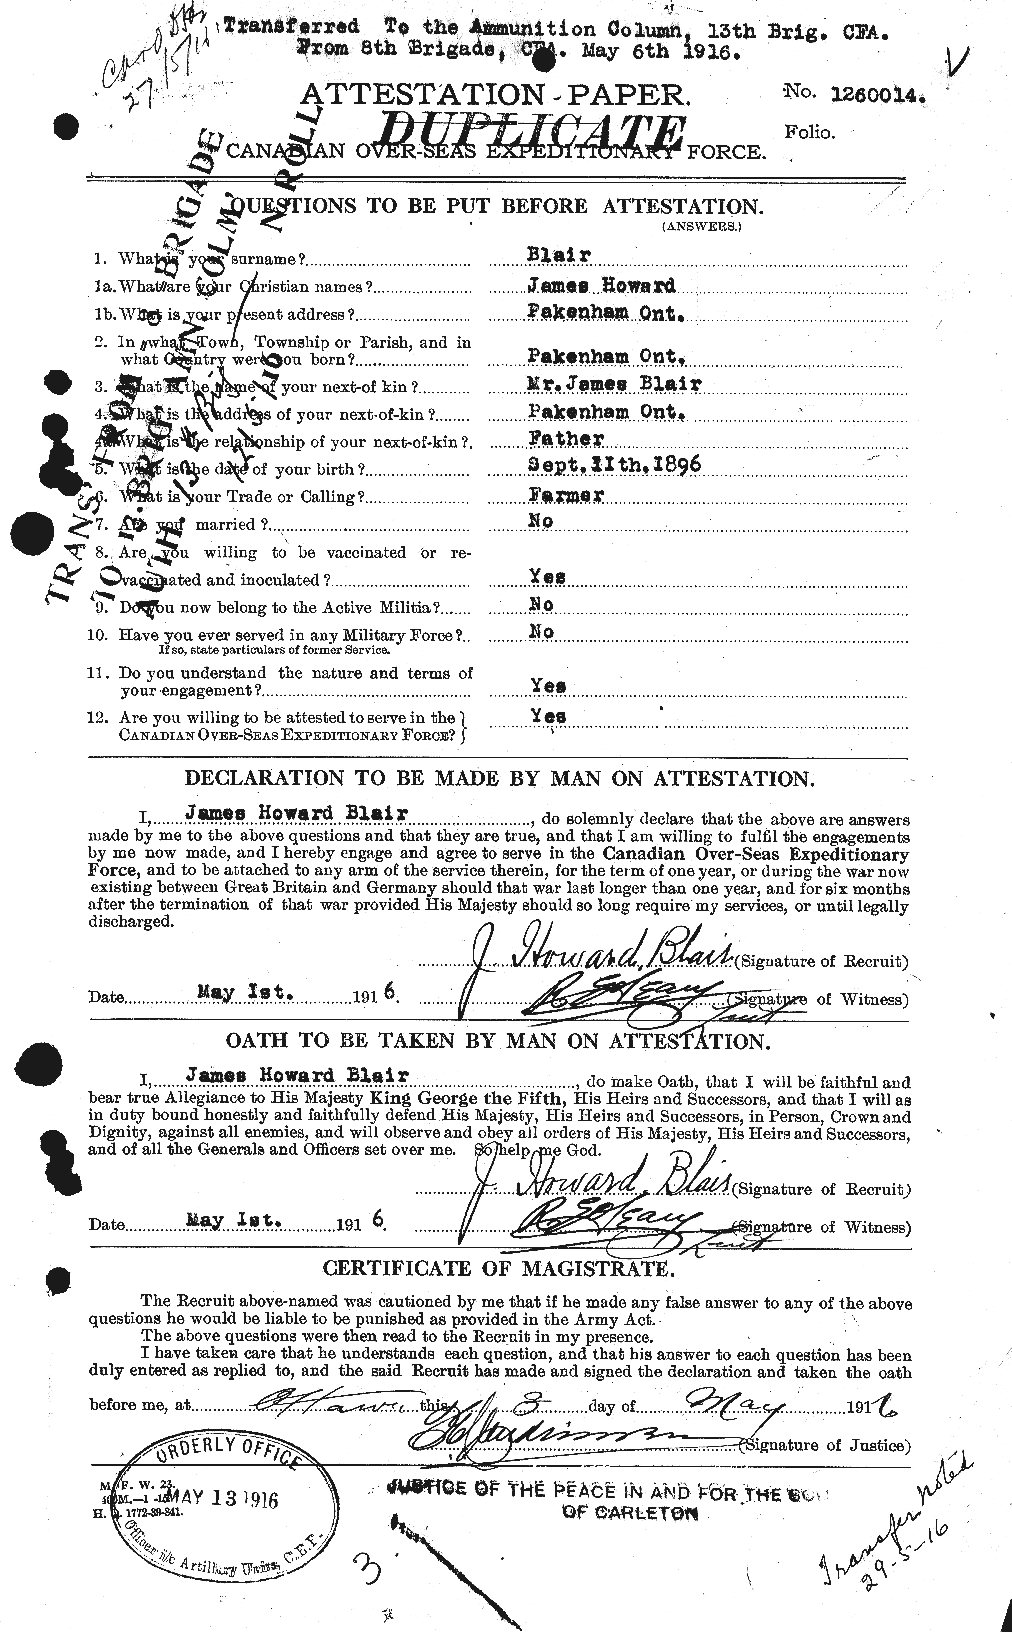 Personnel Records of the First World War - CEF 243072a